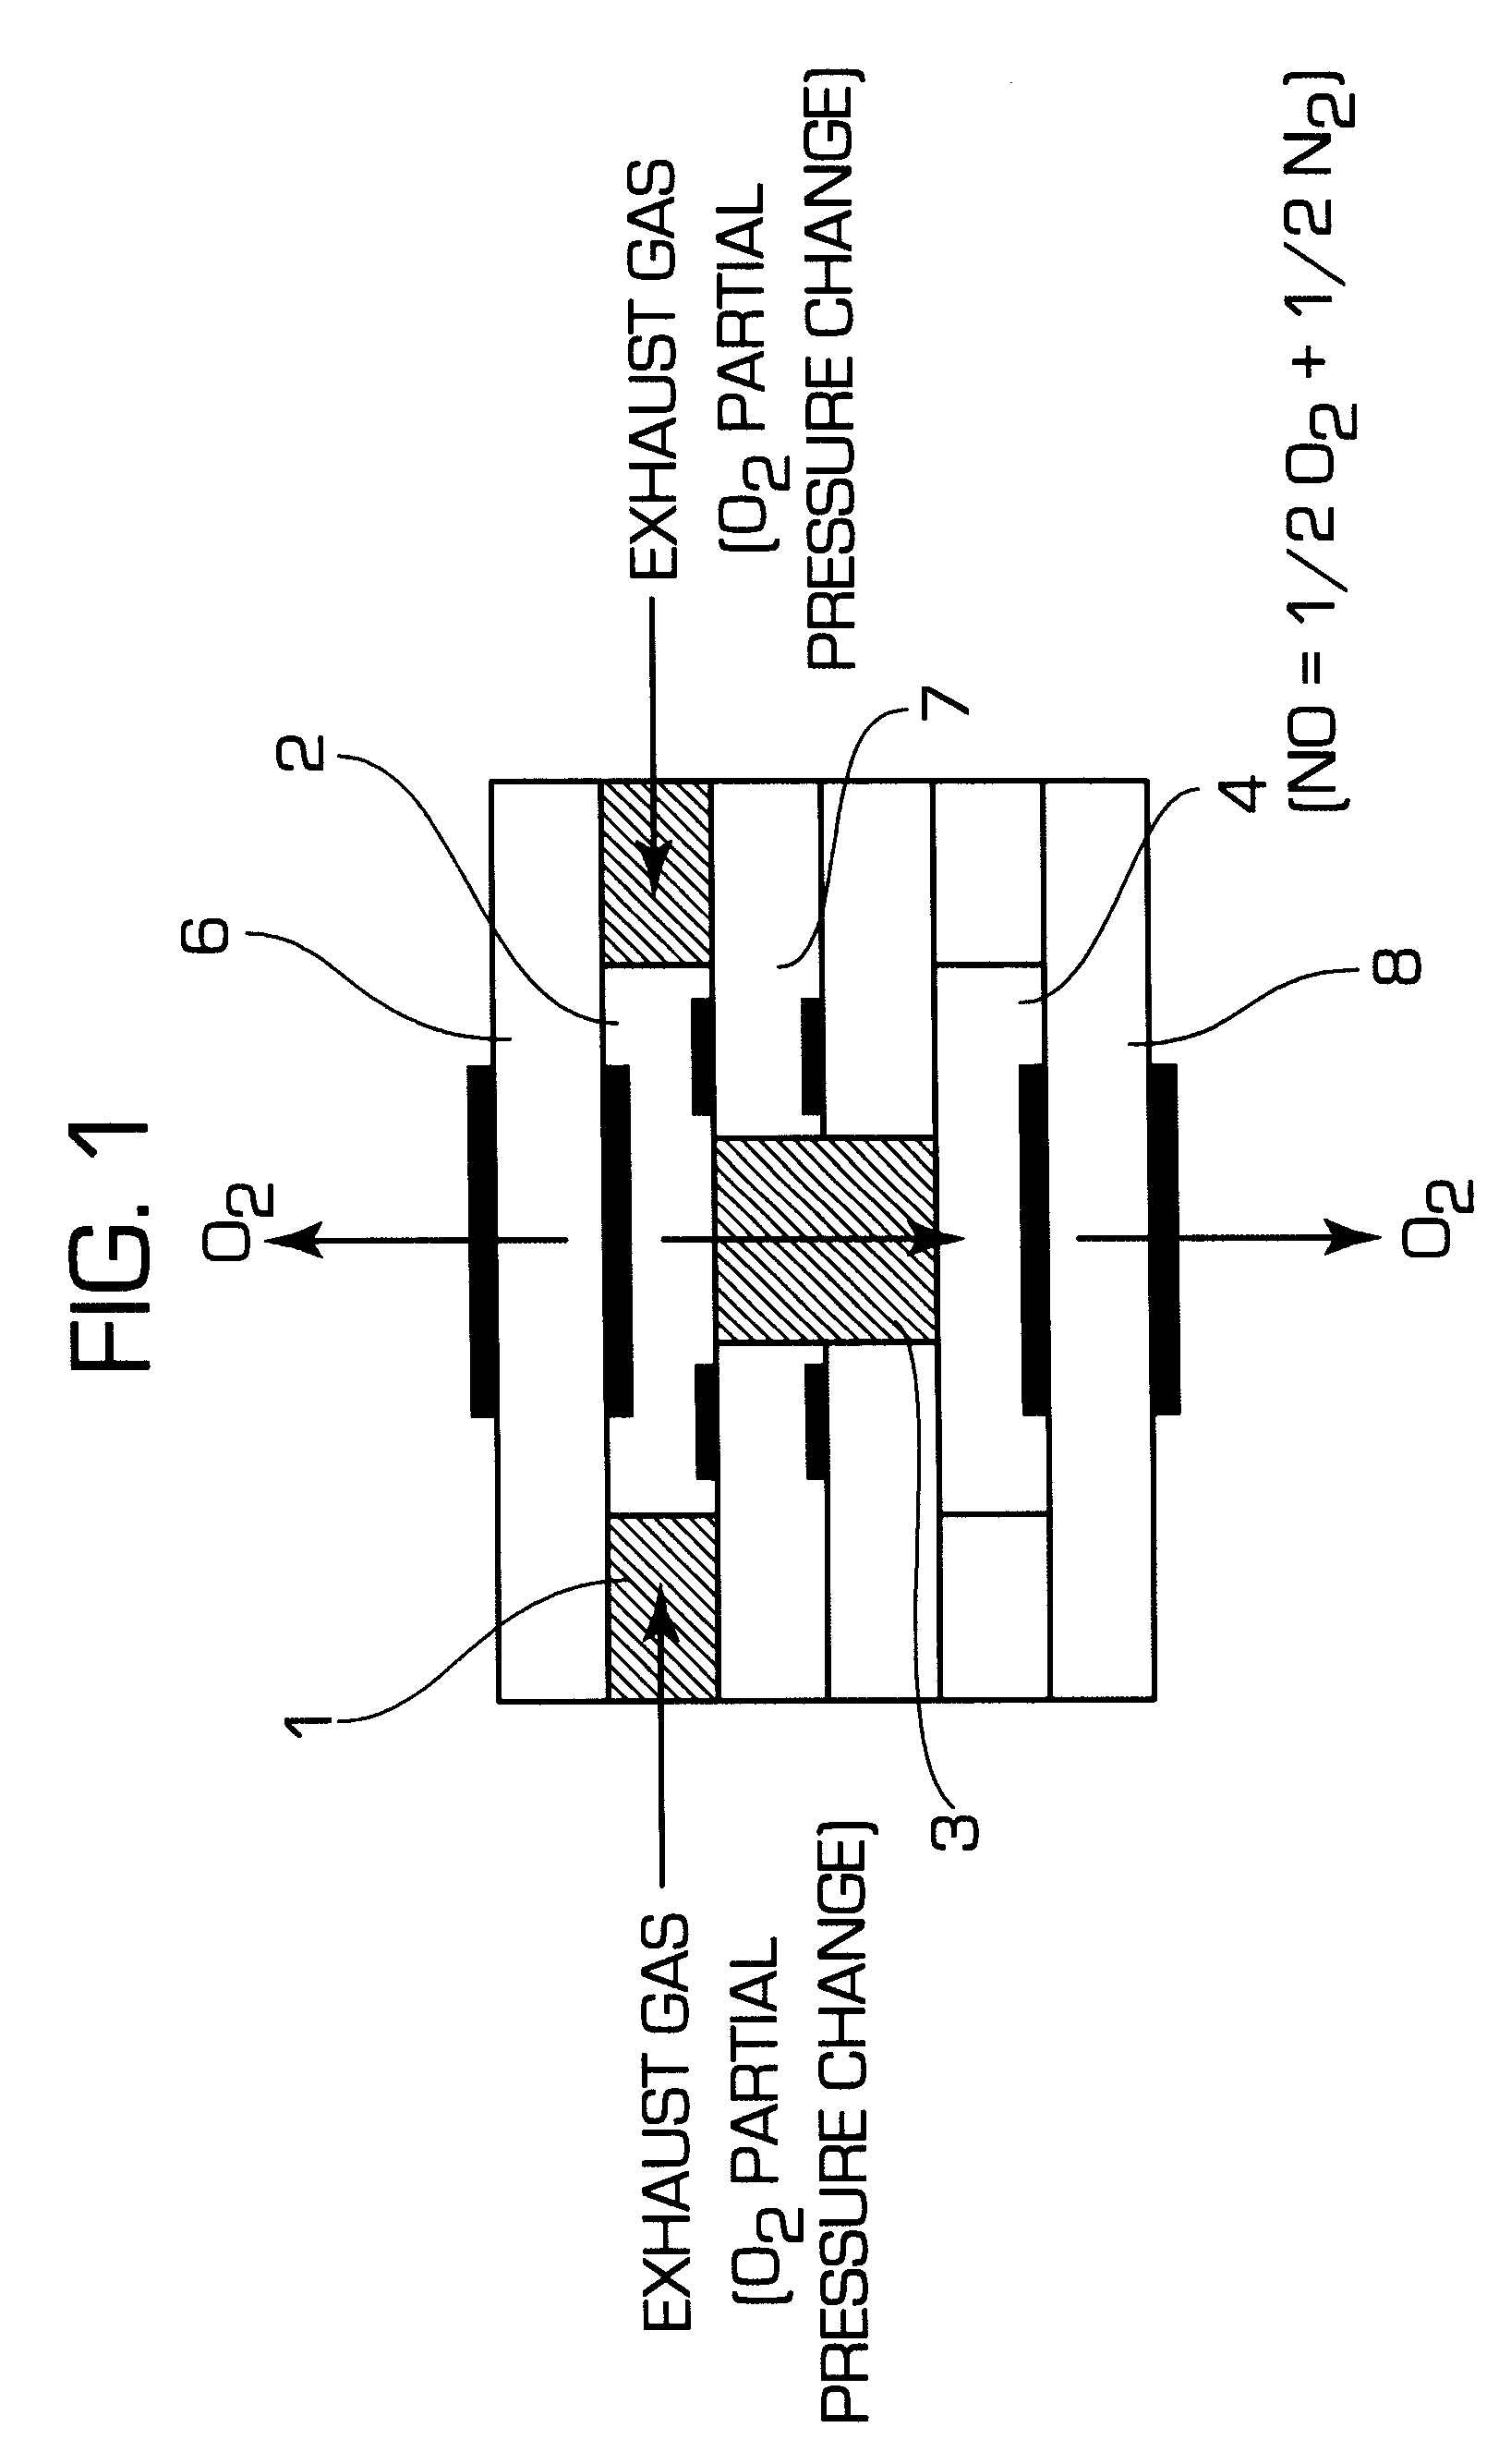 Methods and apparatus for measuring NOx gas concentration, for detecting exhaust gas concentration and for calibrating and controlling gas sensor